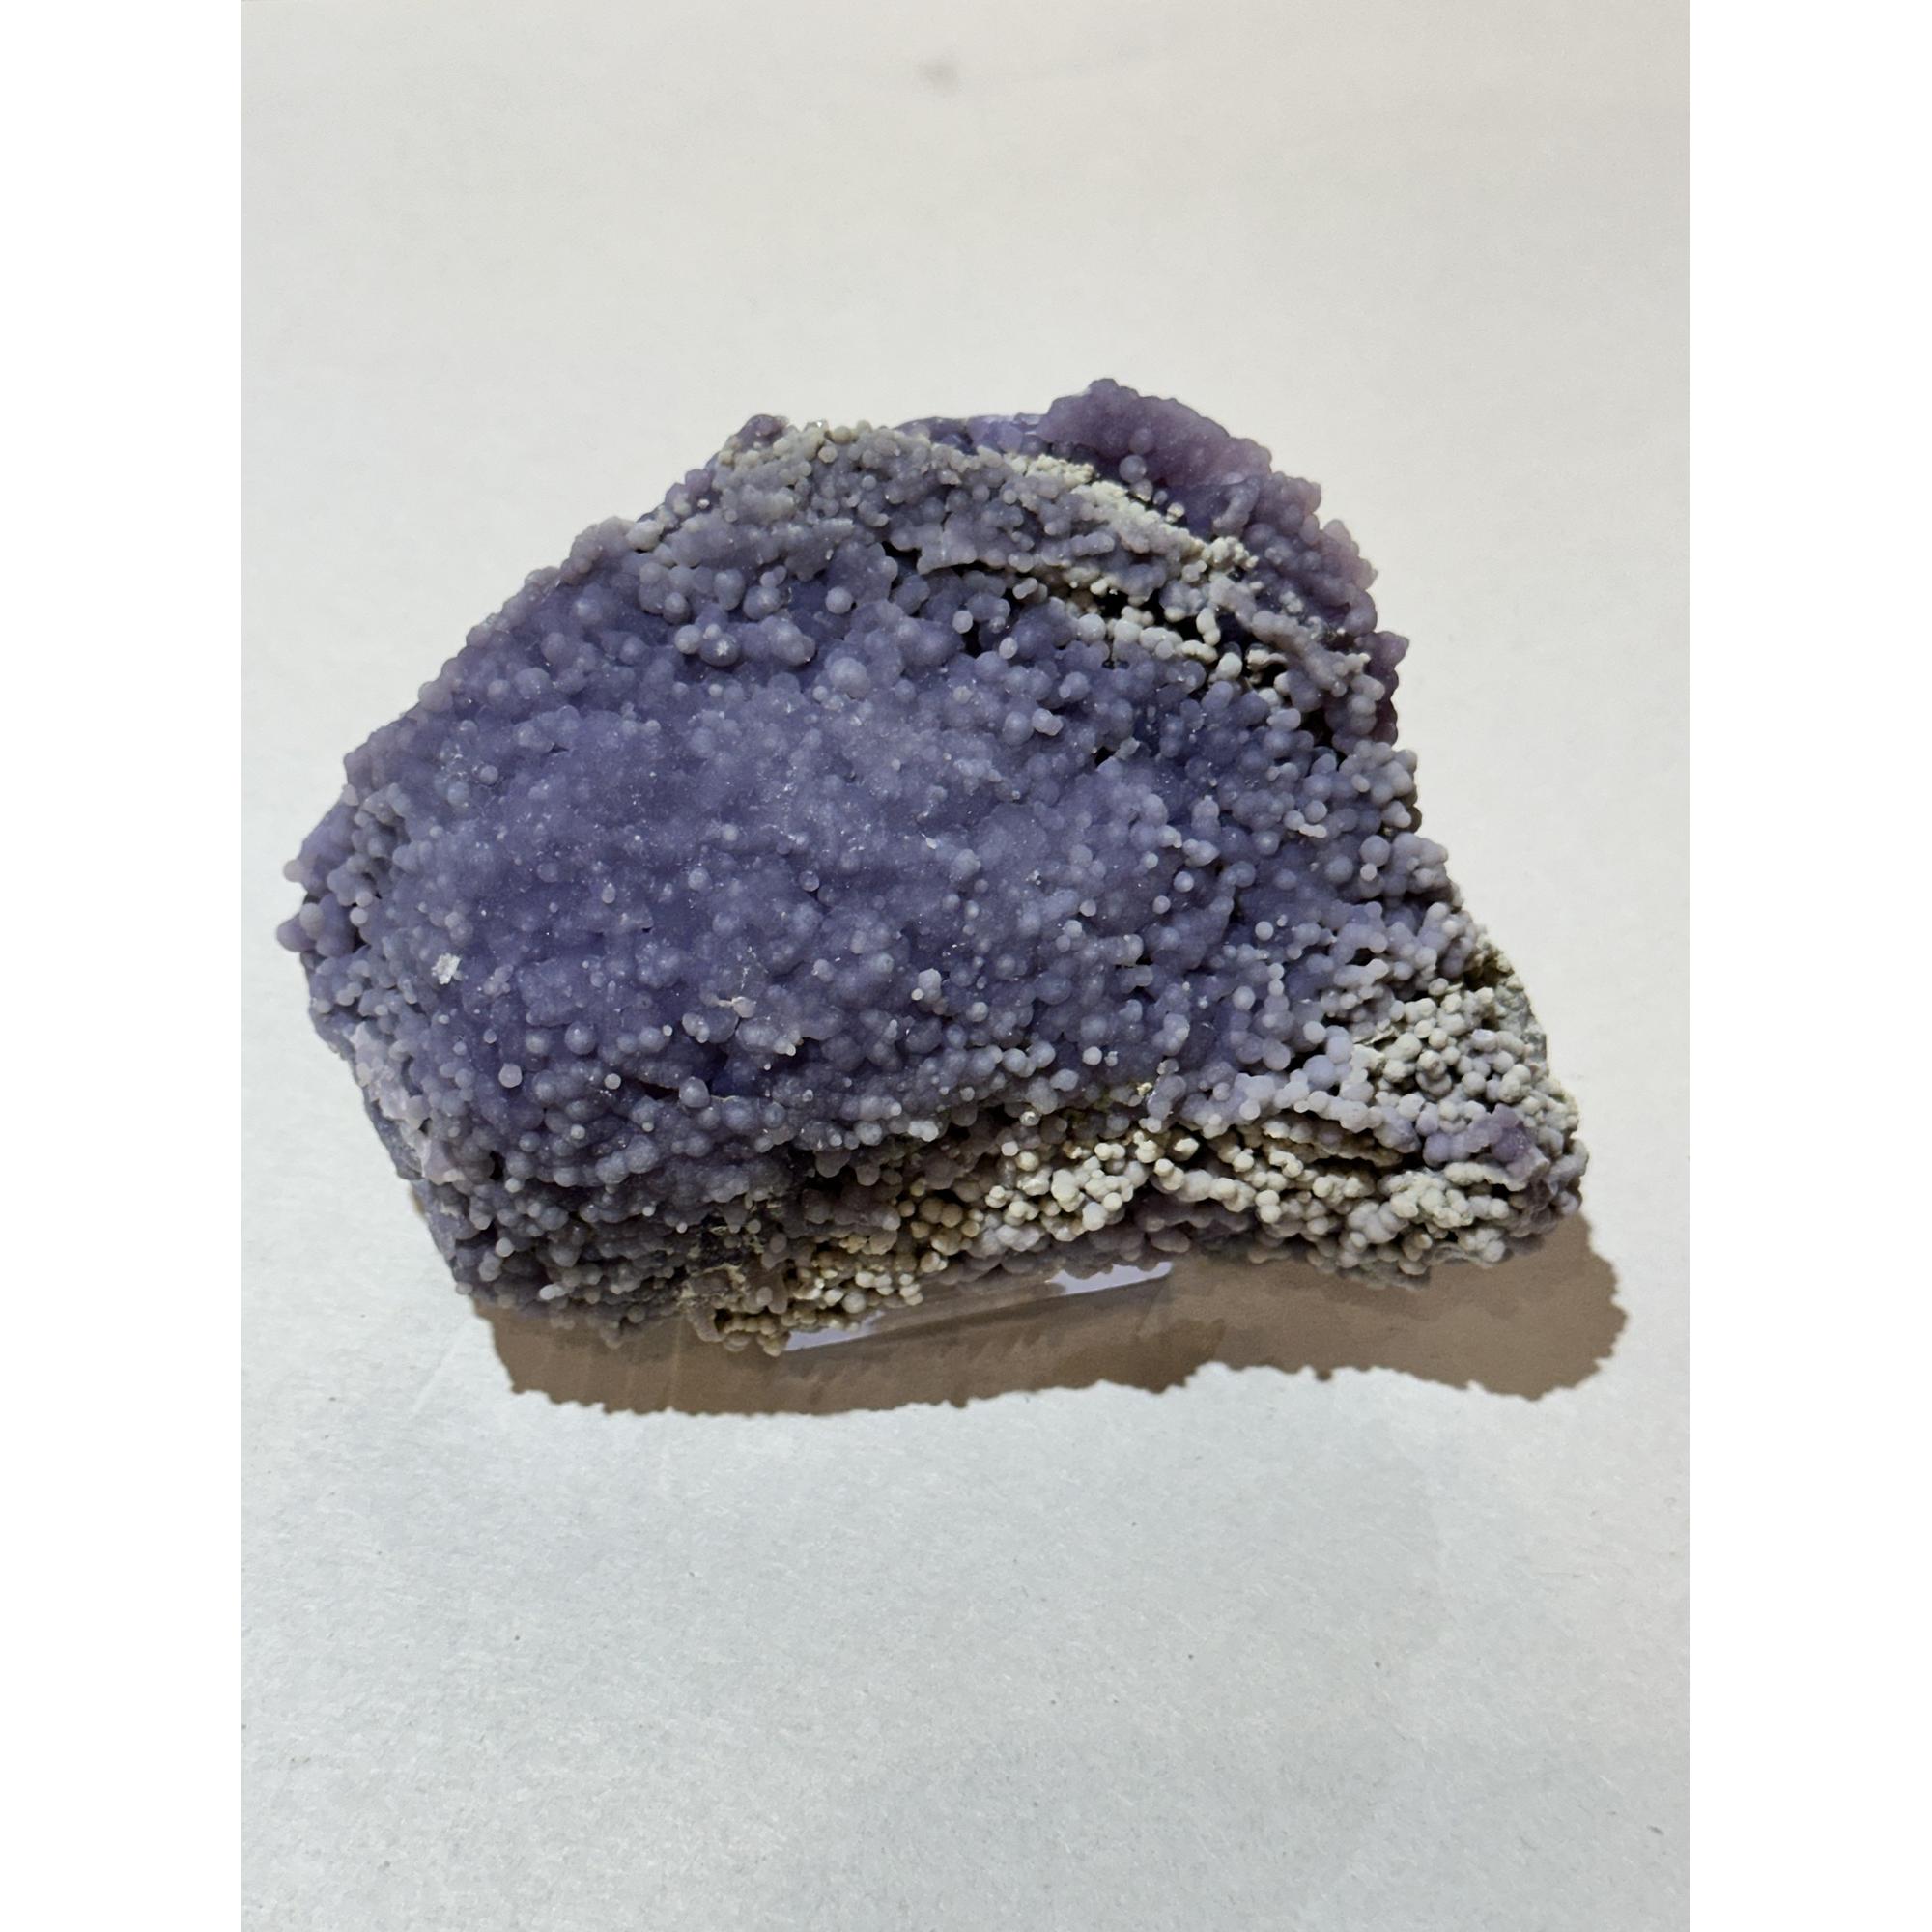 Grape Agate Cluster, Indonesia, A+ color Prehistoric Online